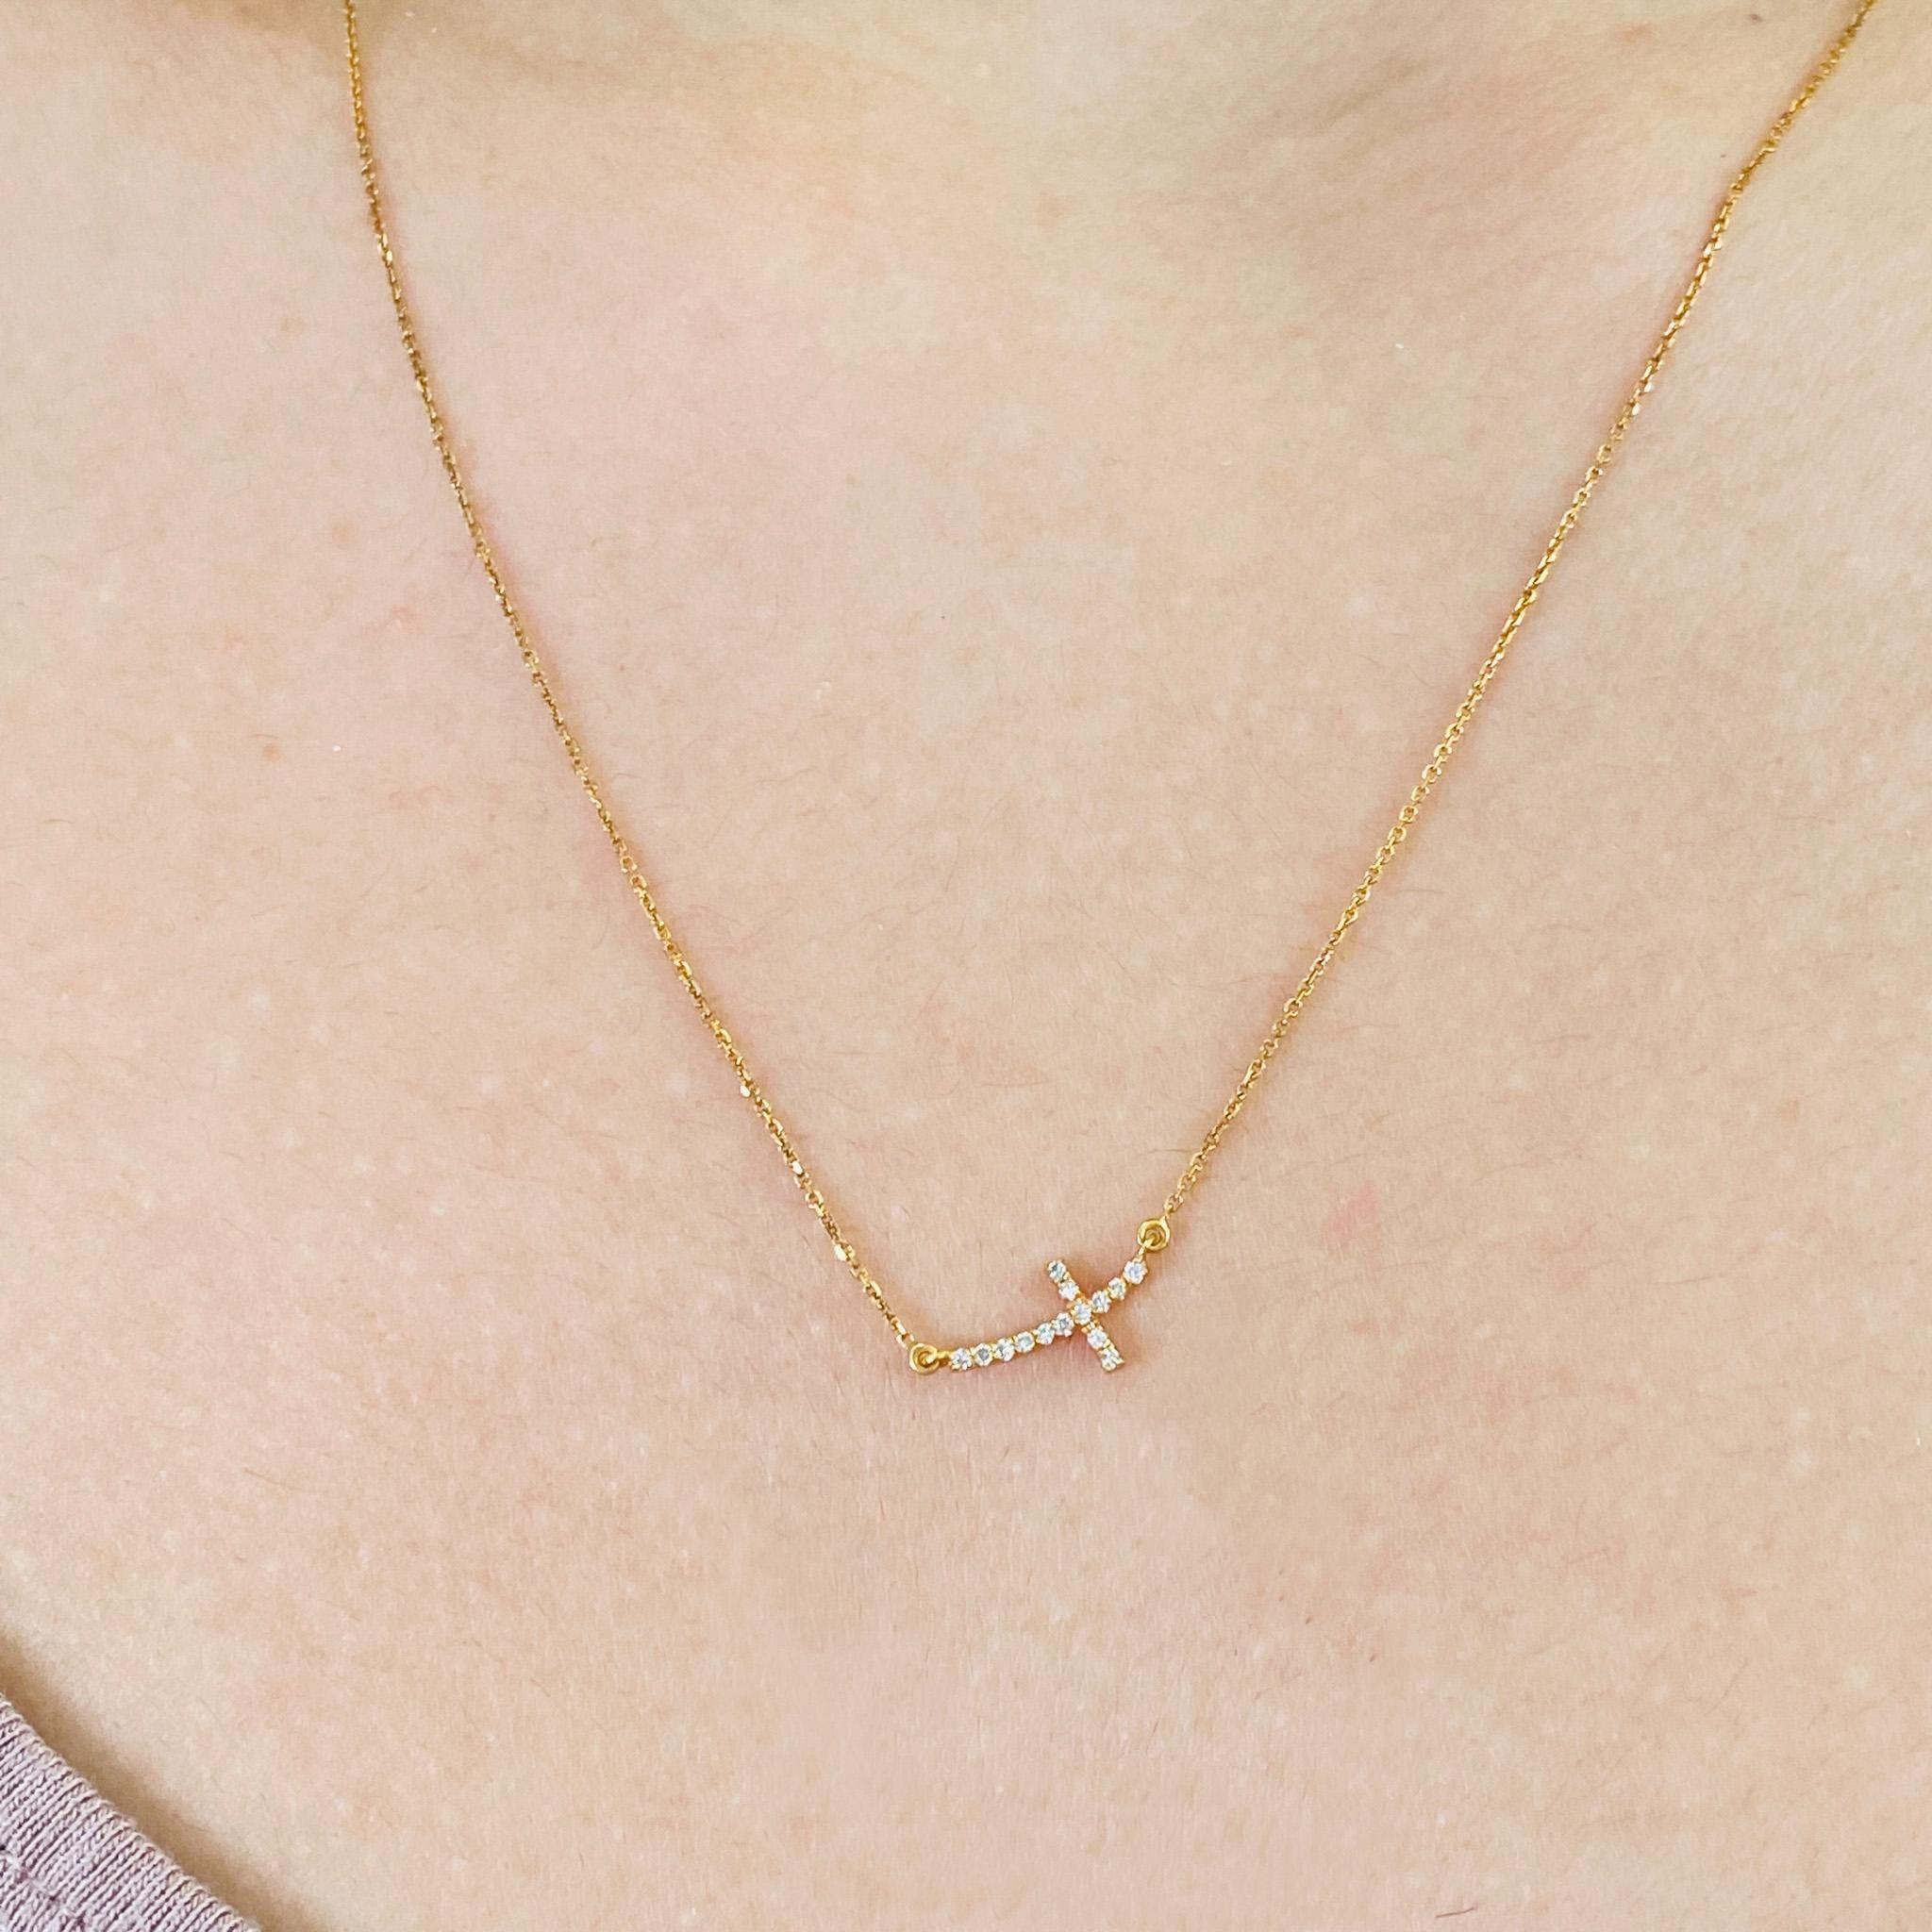 Add a dainty diamond cross in rose gold to the neck of a loved one celebrating an important milestone, like first communion or a quinceñera! This beautiful curved cross pendant will flatter your favorite person! The necklace has an adorable open